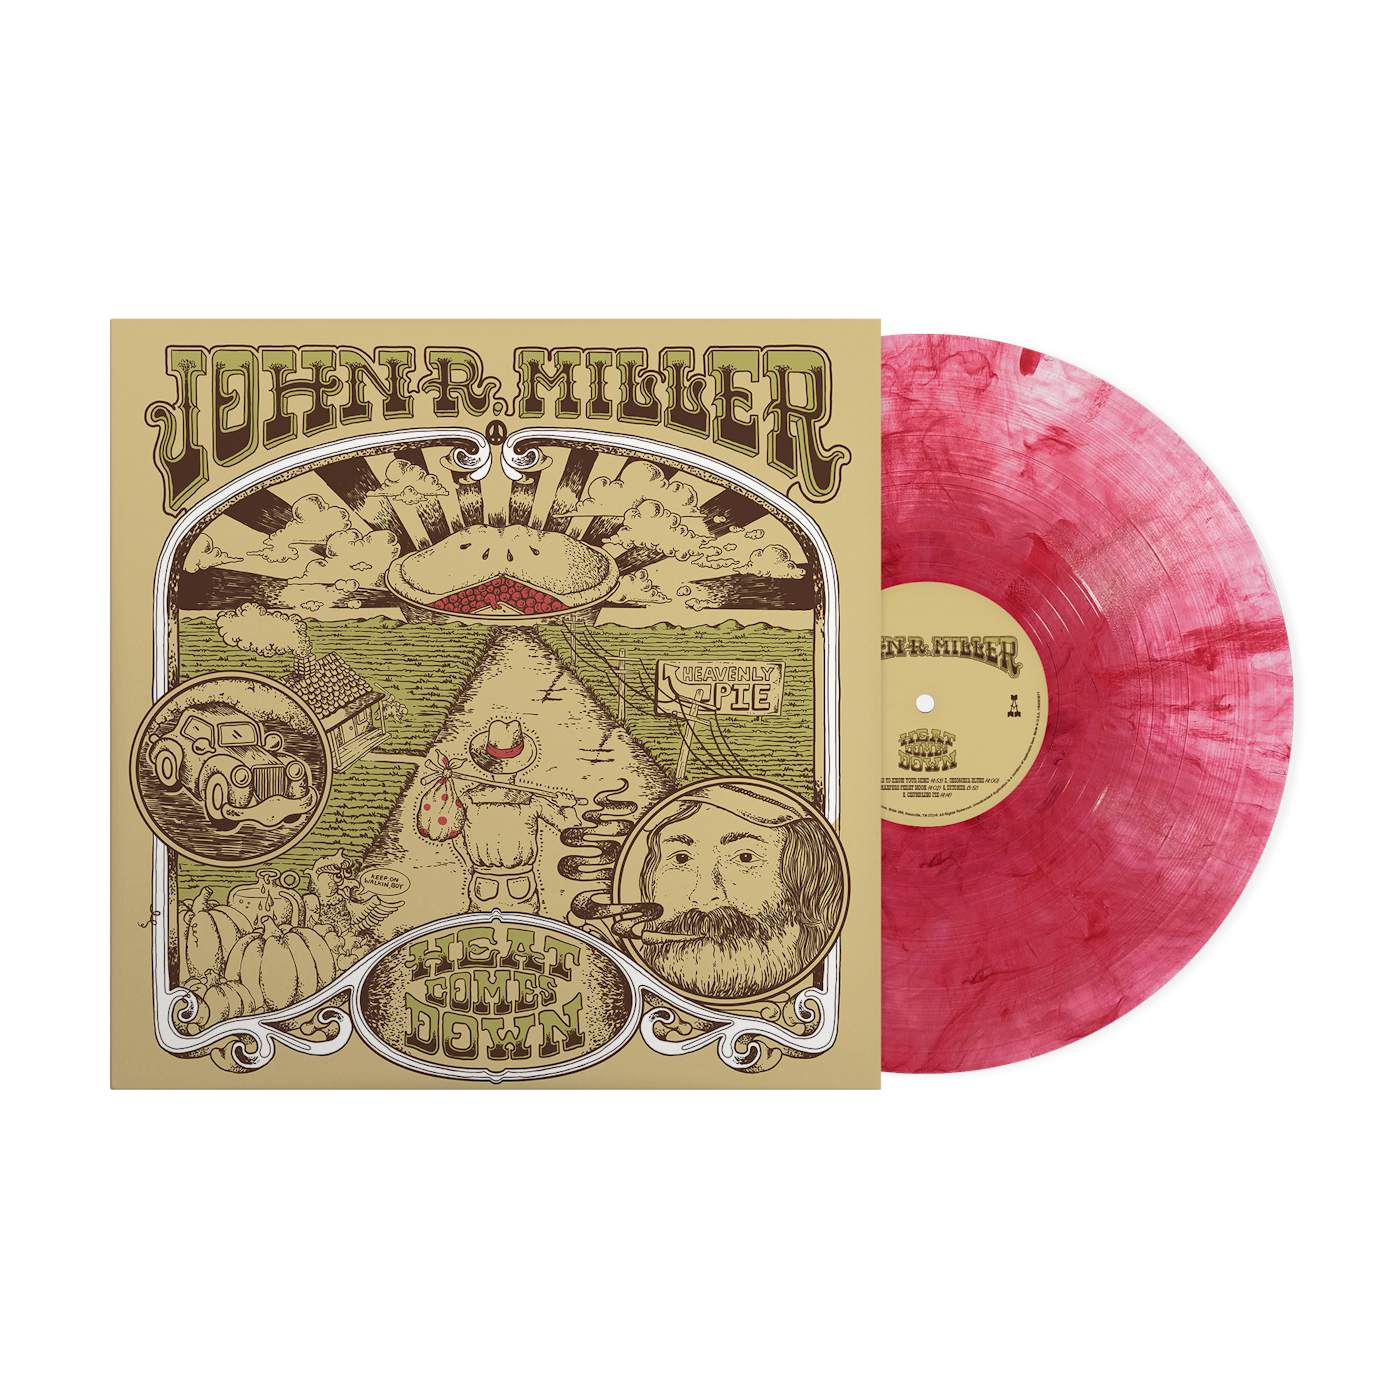 John R. Miller Heat Comes Down Limited Edition "Cherry Cheesecake" Vinyl